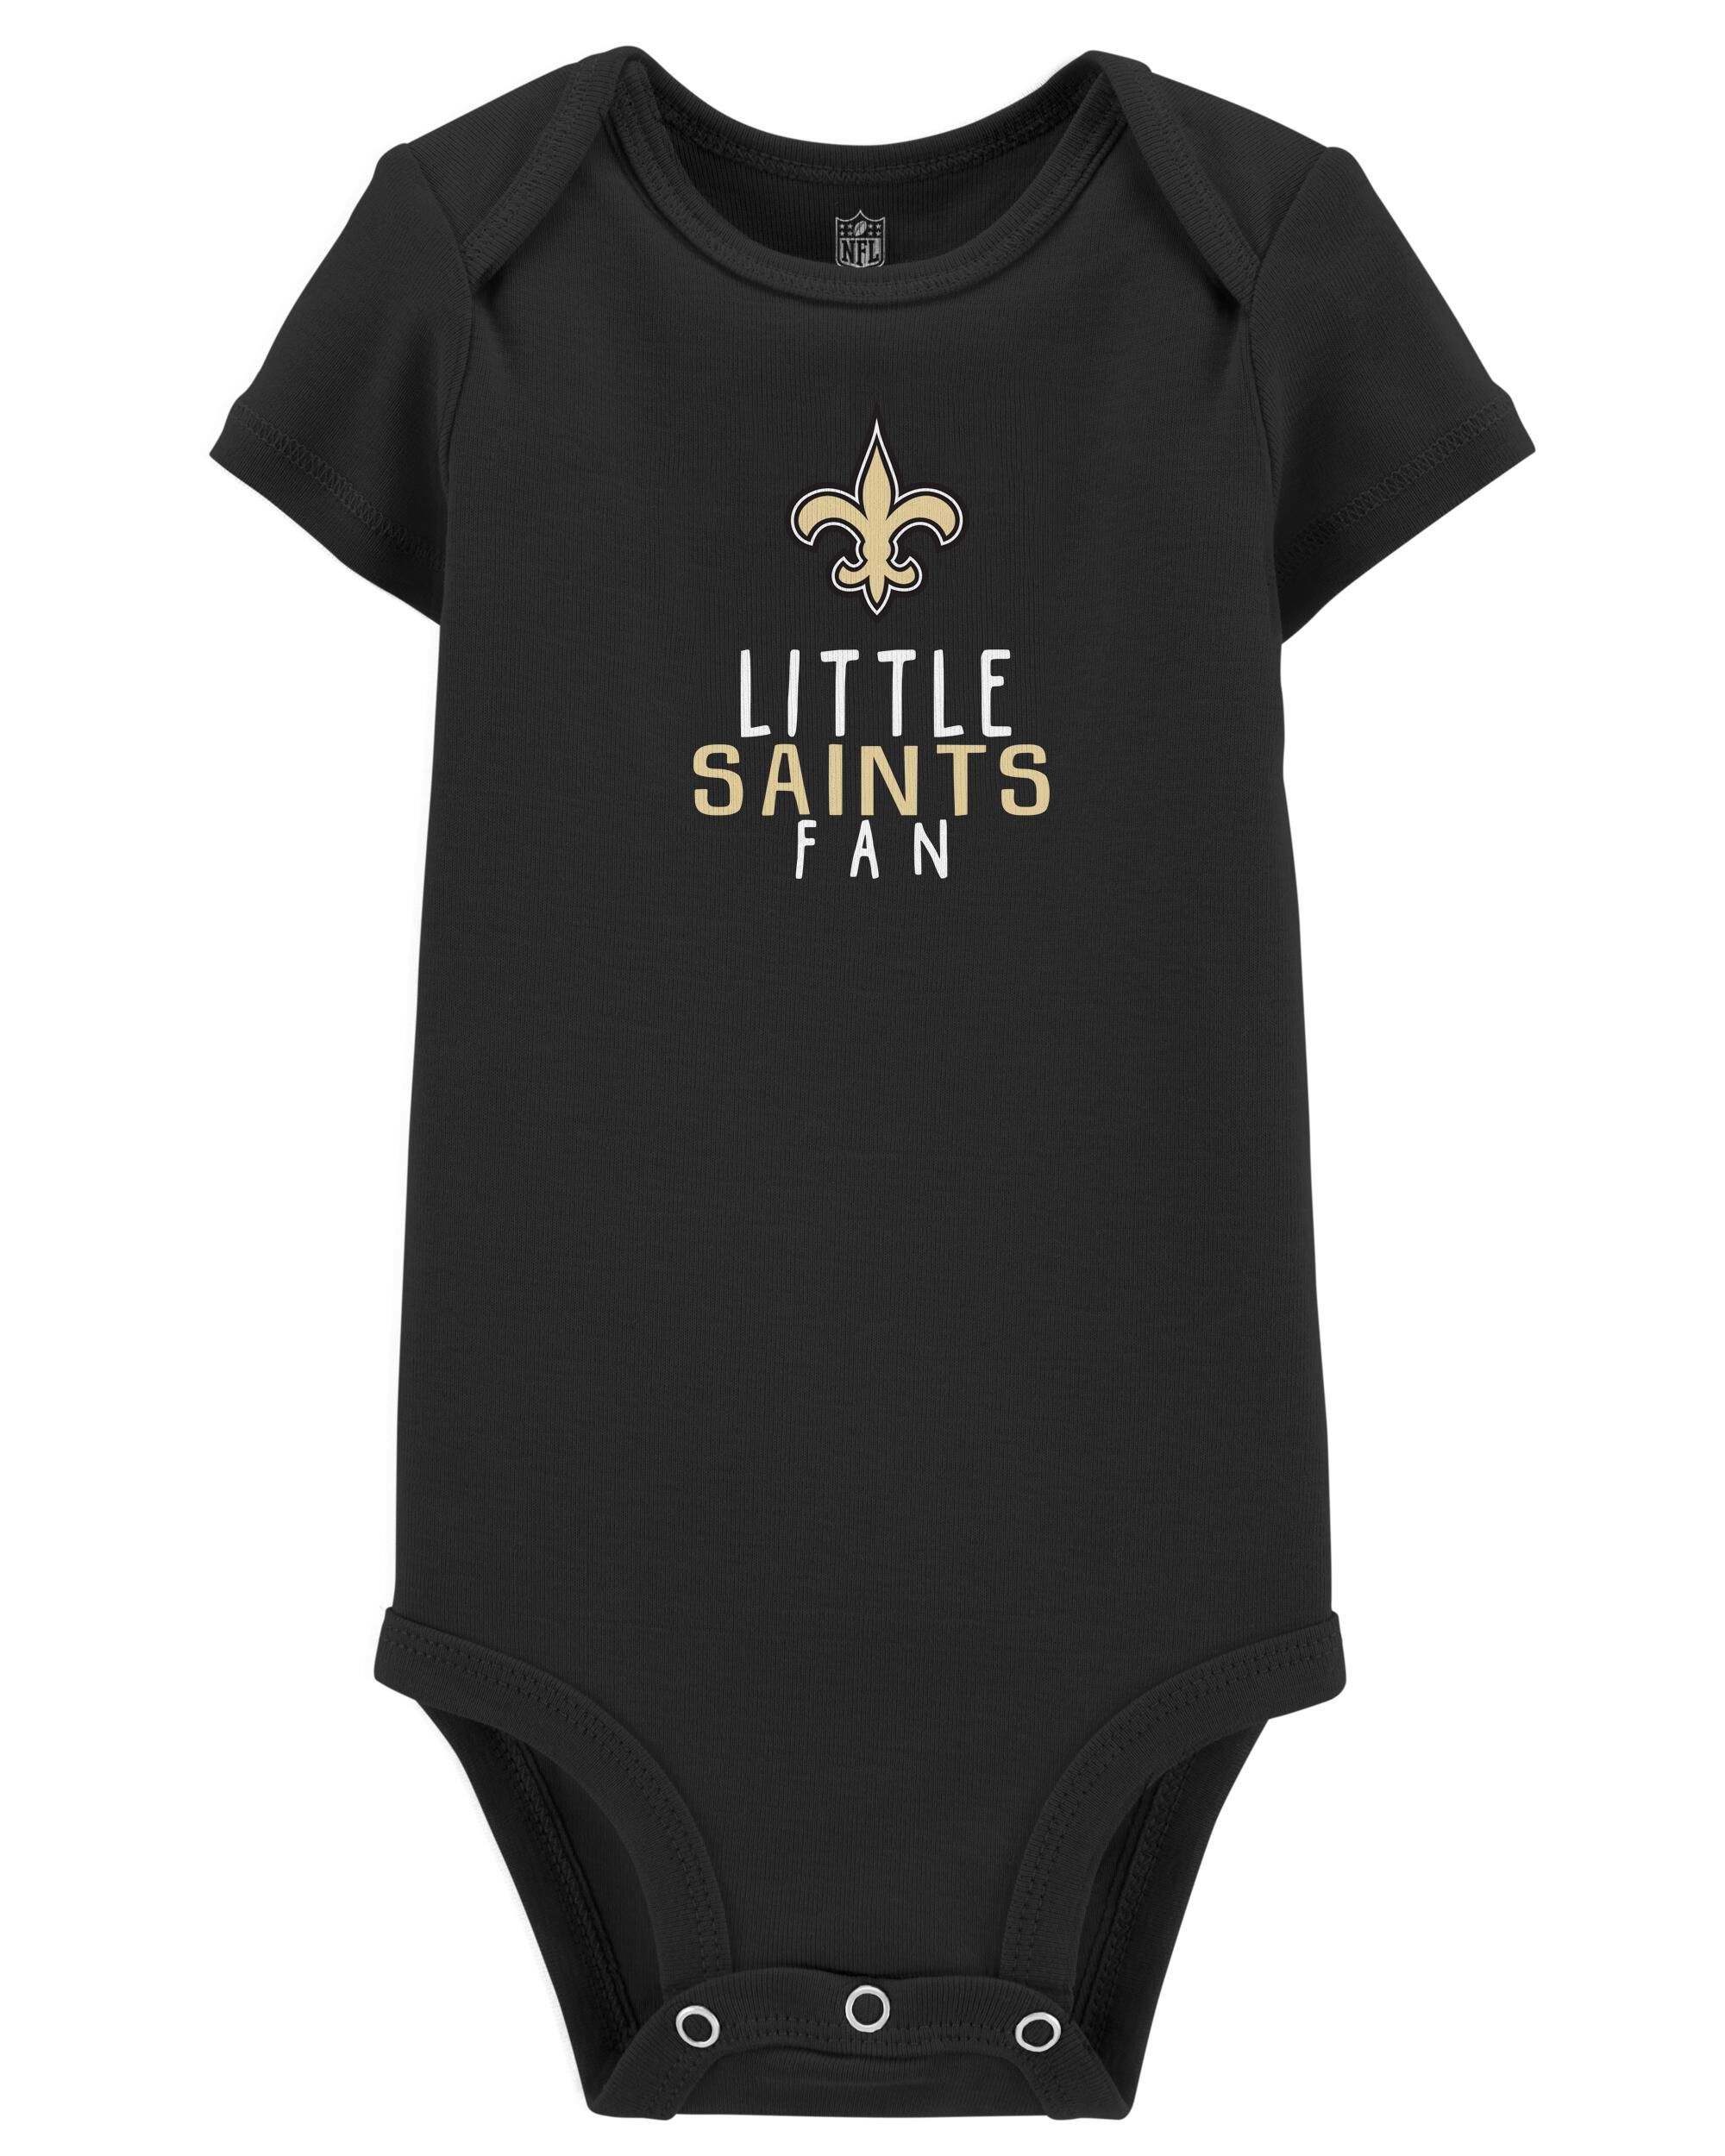 new orleans saints baby gear